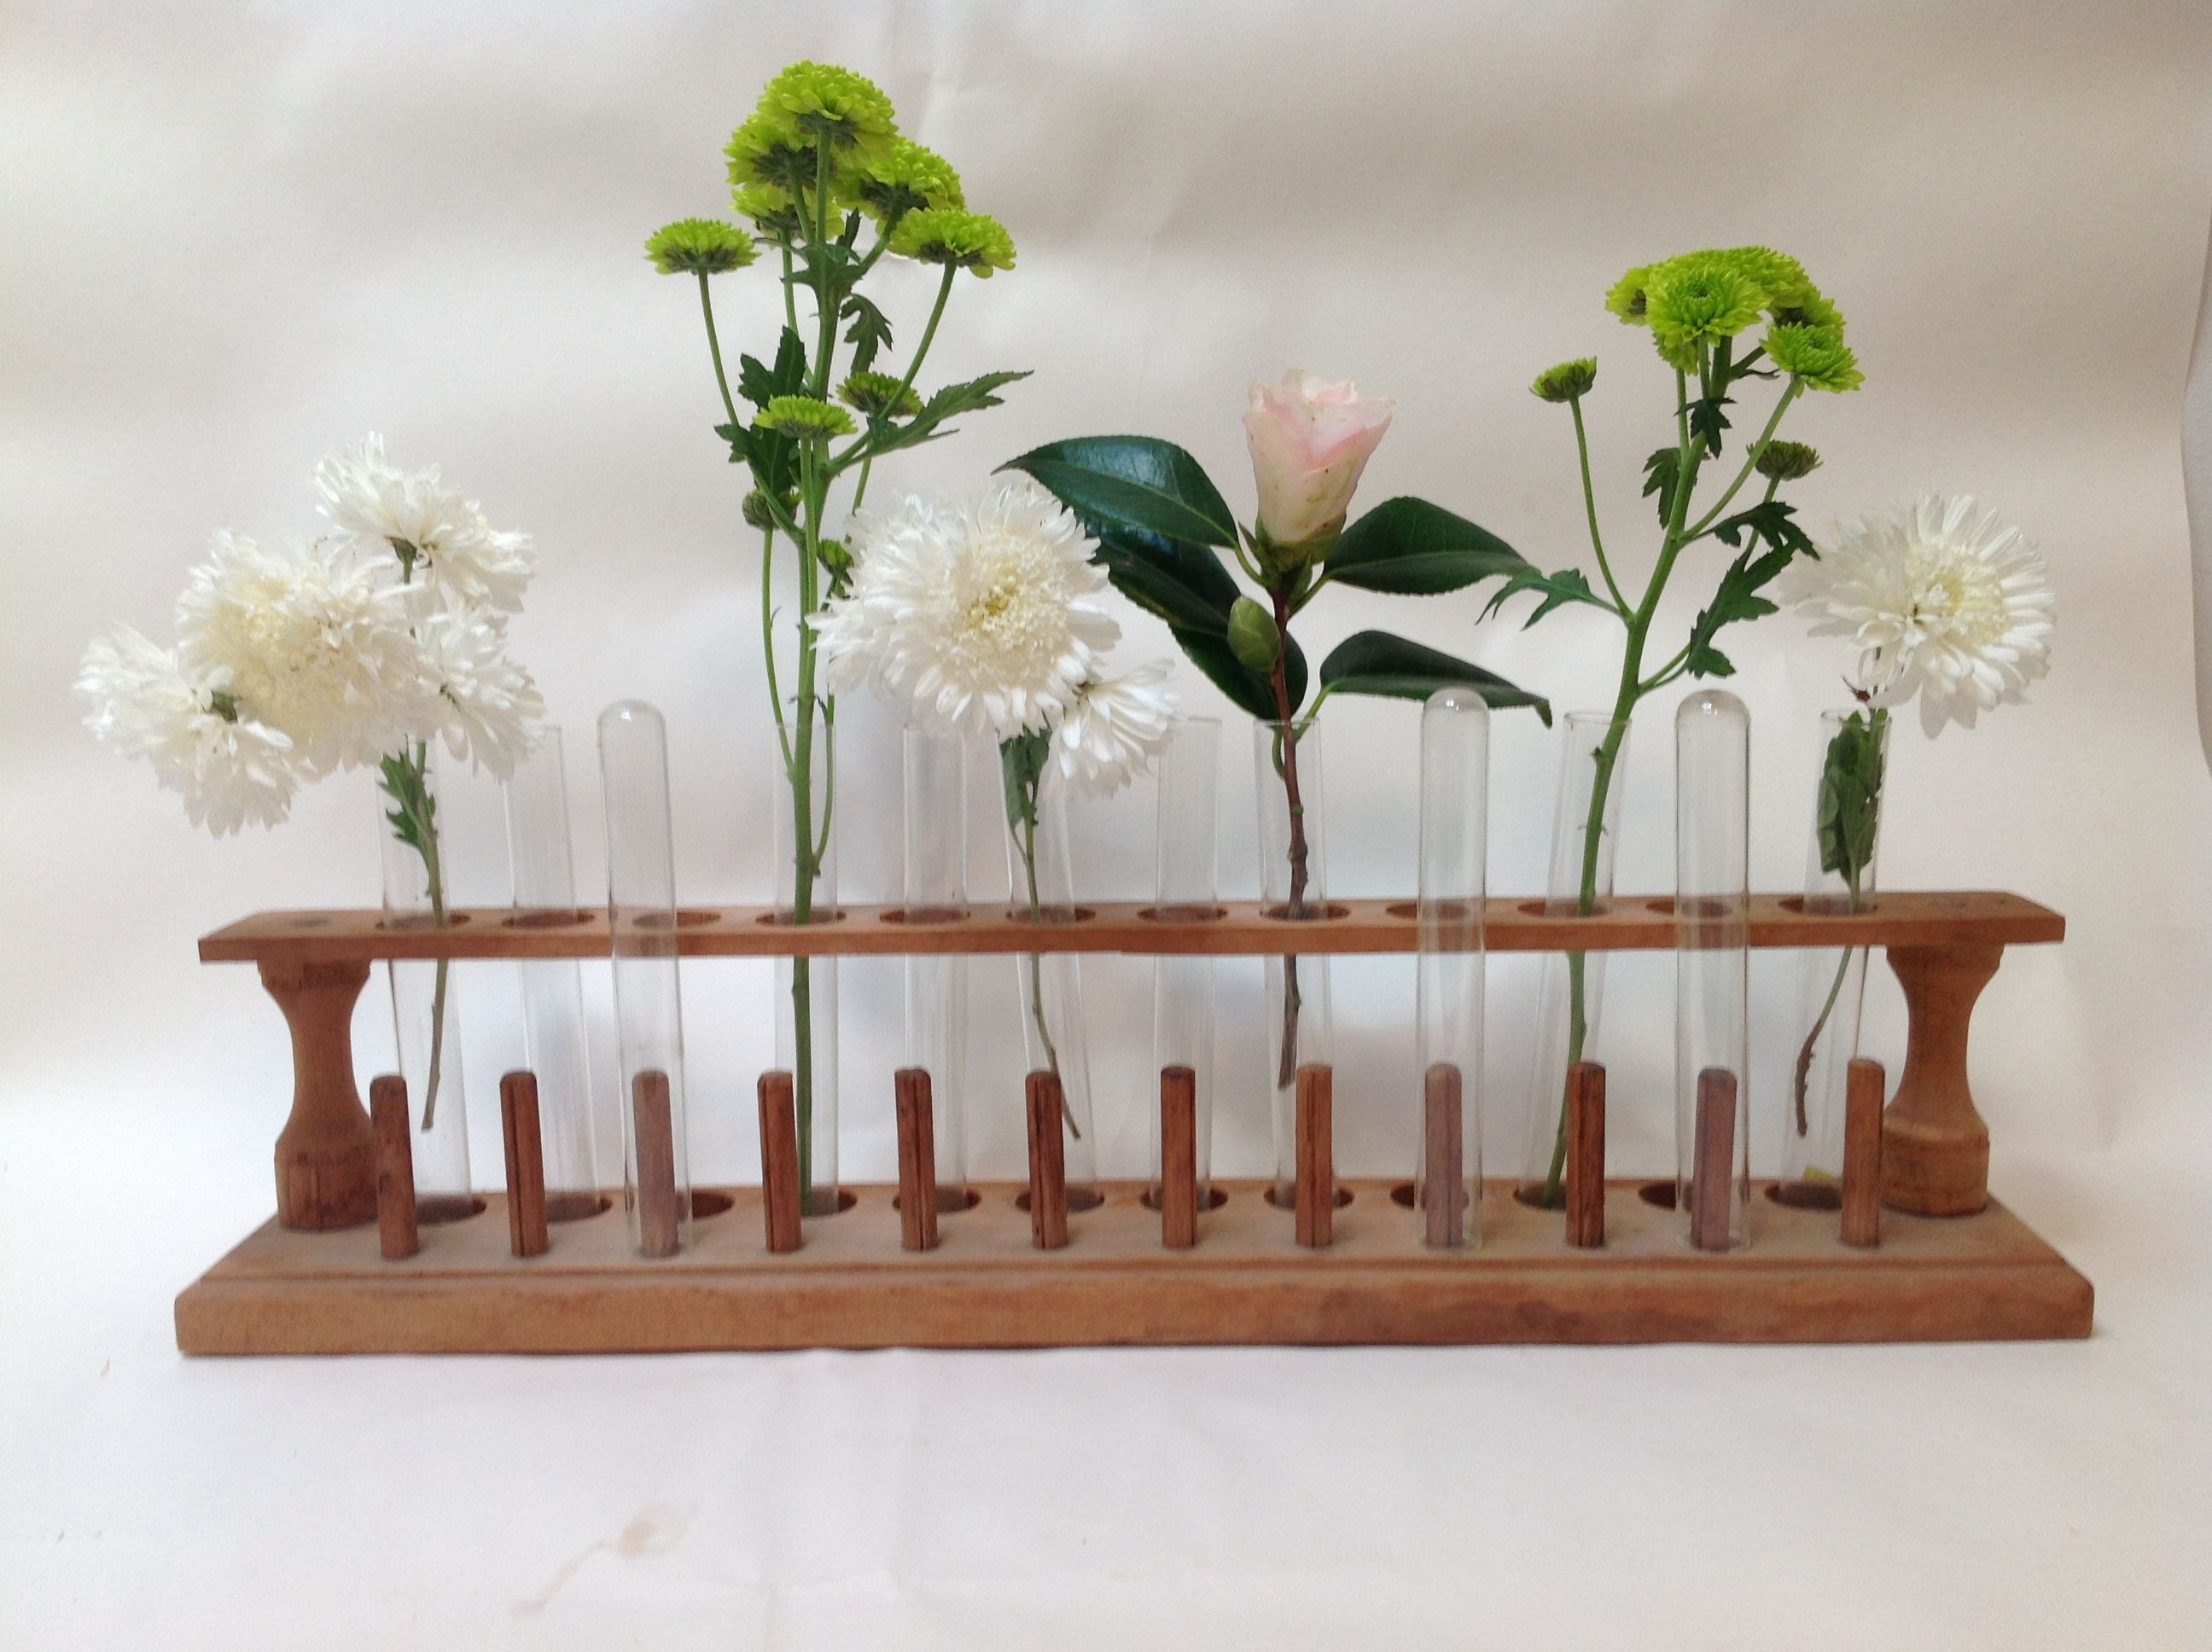 20 Stylish Tube Glass Vase 2024 free download tube glass vase of vintage test tubes vase and flowers www thehuntereclectic com the throughout vintage test tubes vase and flowers www thehuntereclectic com